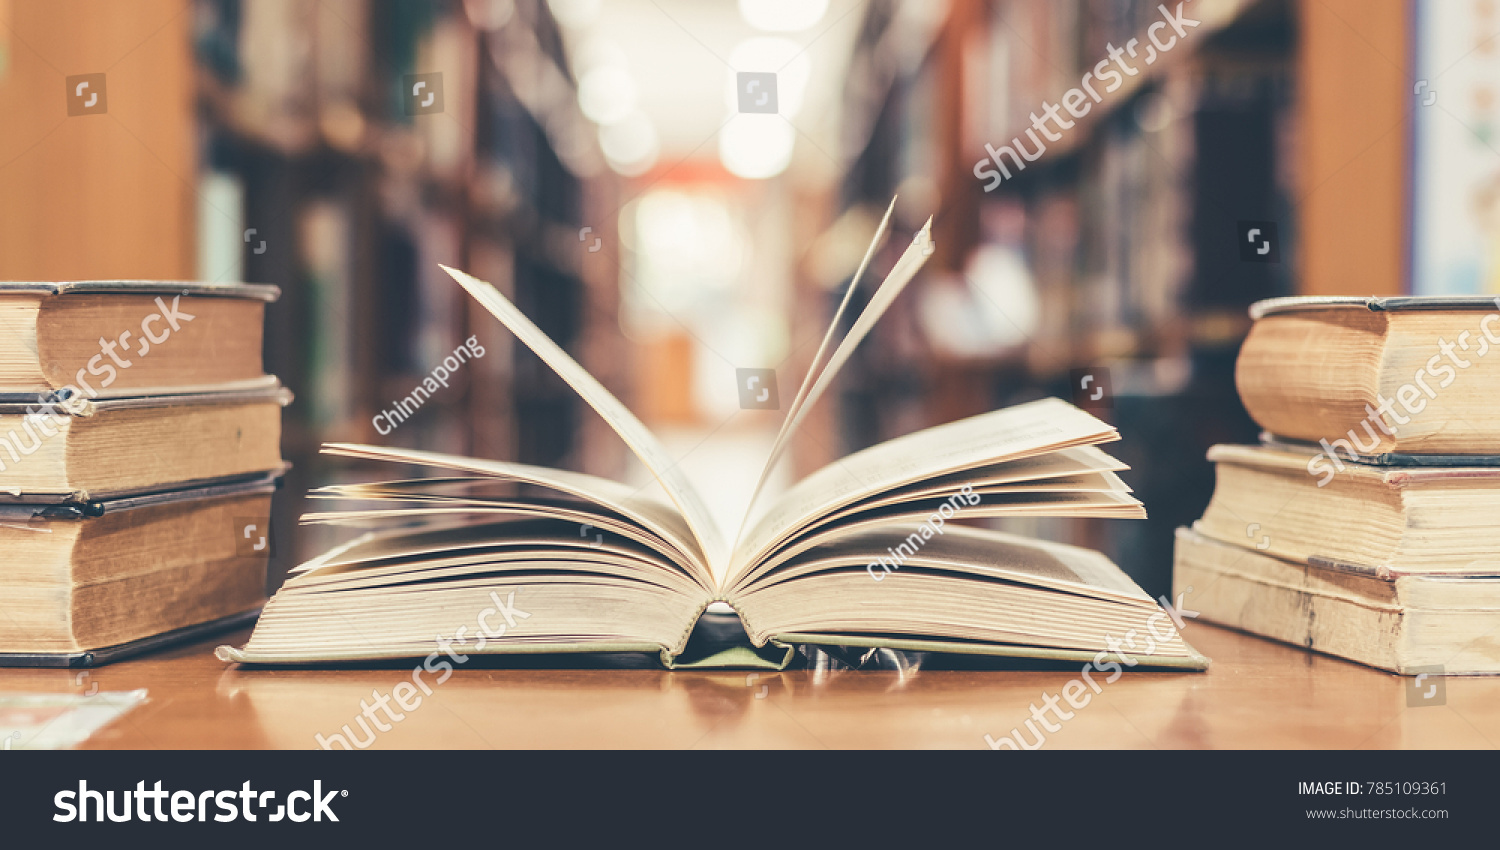 Book in library with old open textbook, stack piles of literature text archive on reading desk, and aisle of bookshelves in school study class room background for academic education learning concept #785109361